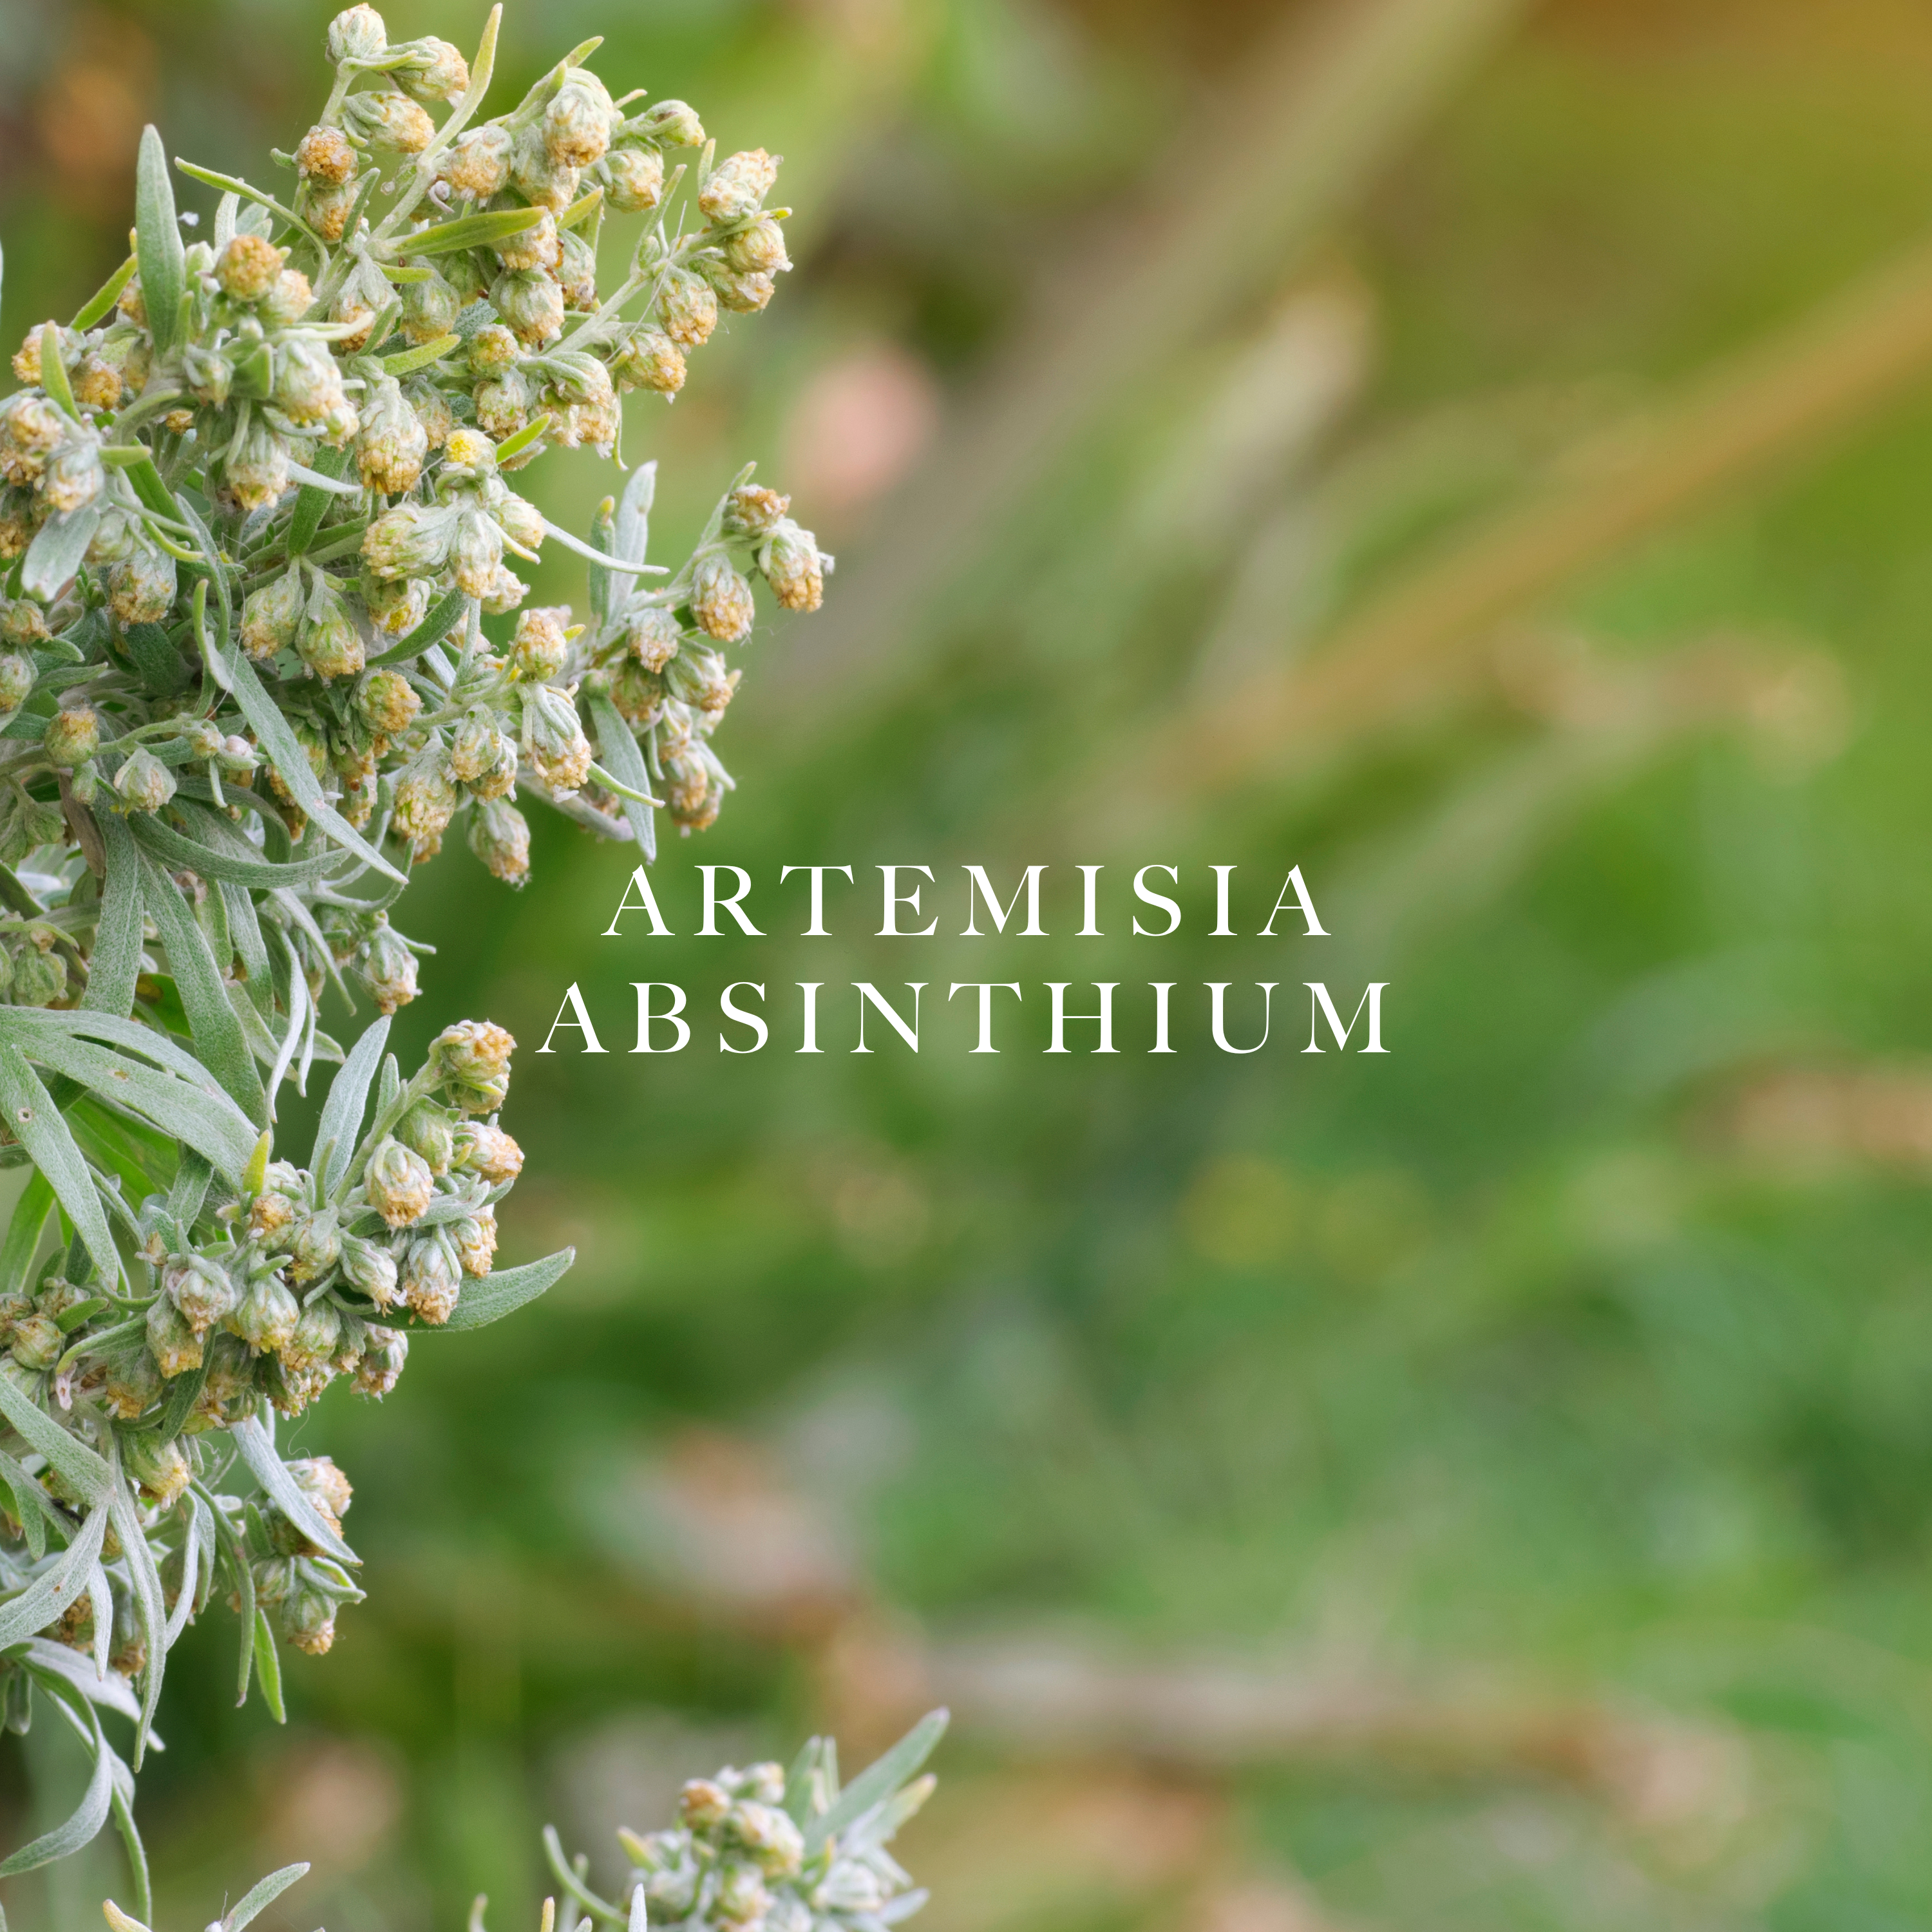 Caswell-Massey Elixir of Love Eau de Toilette: image showing one of the scent notes, the flower artemisia absinthium